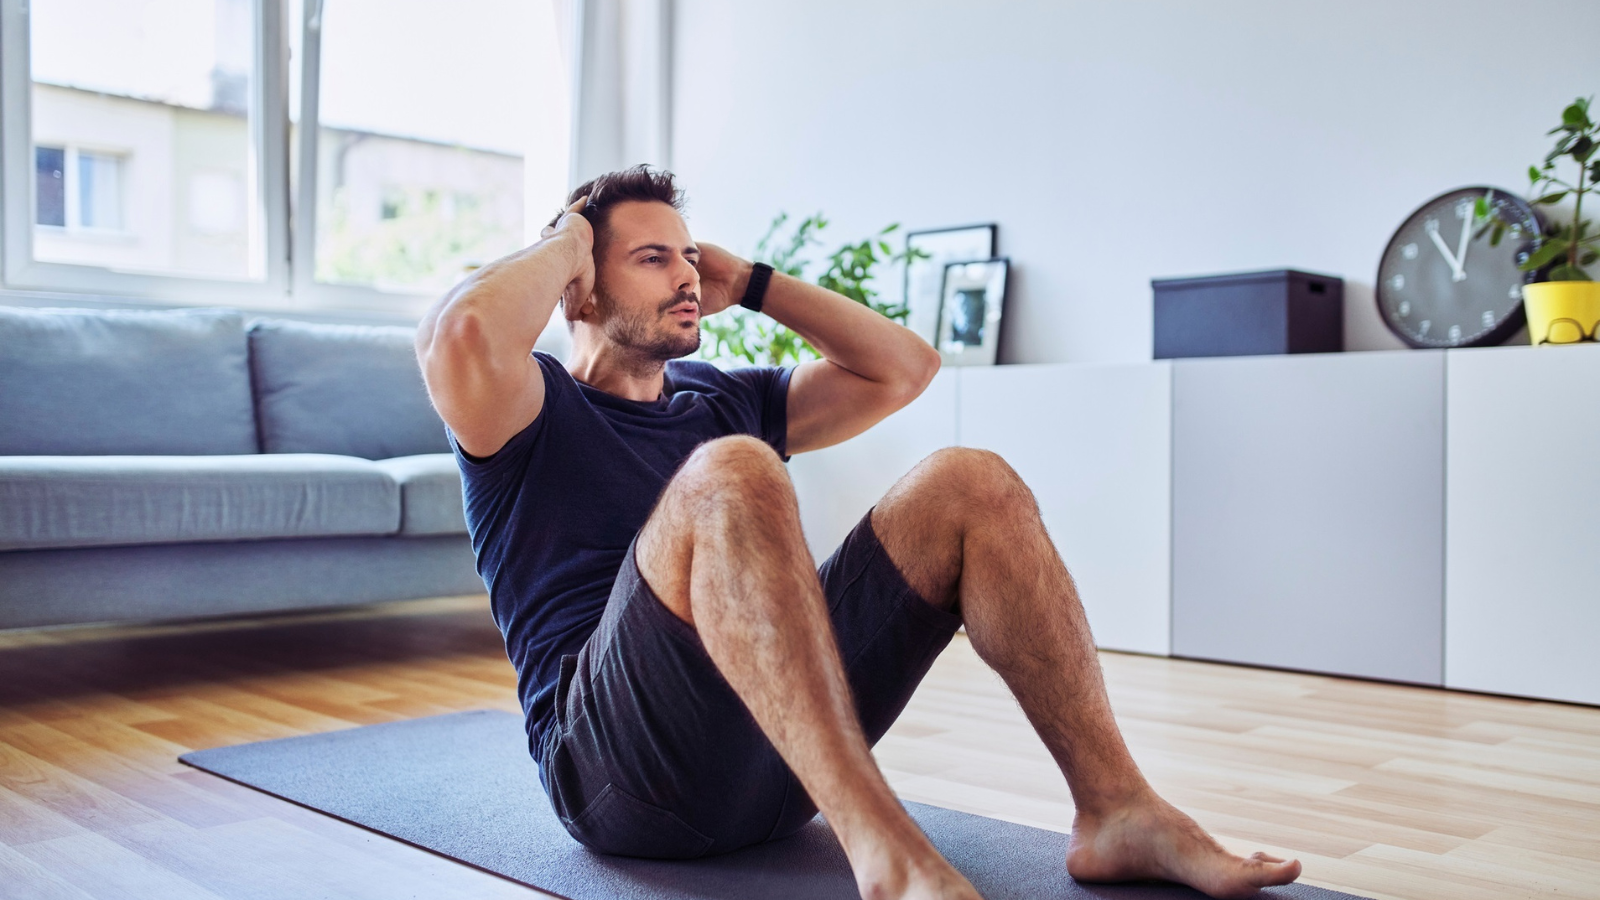 3 Bodyweight Exercise Routines and 1 Dumbbell Routine To Do At Home